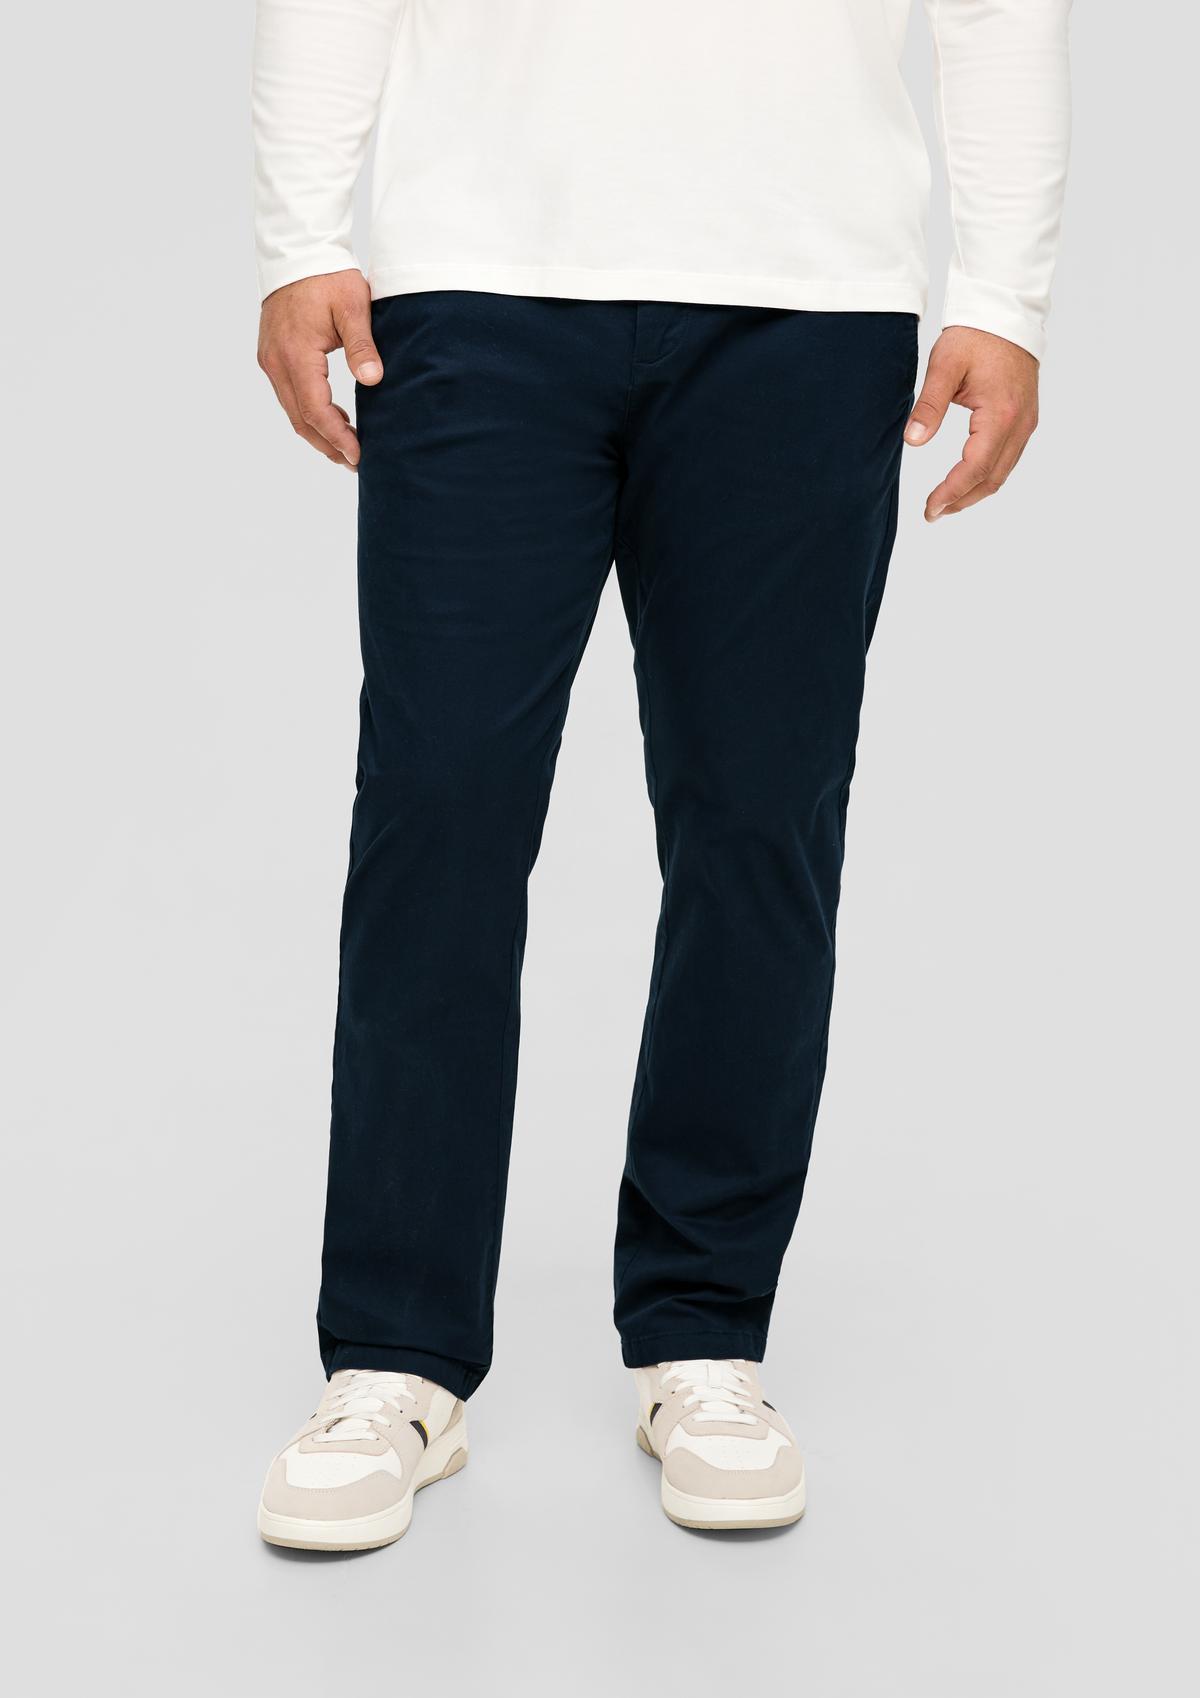 Relaxed fit: navy trousers - cargo-style